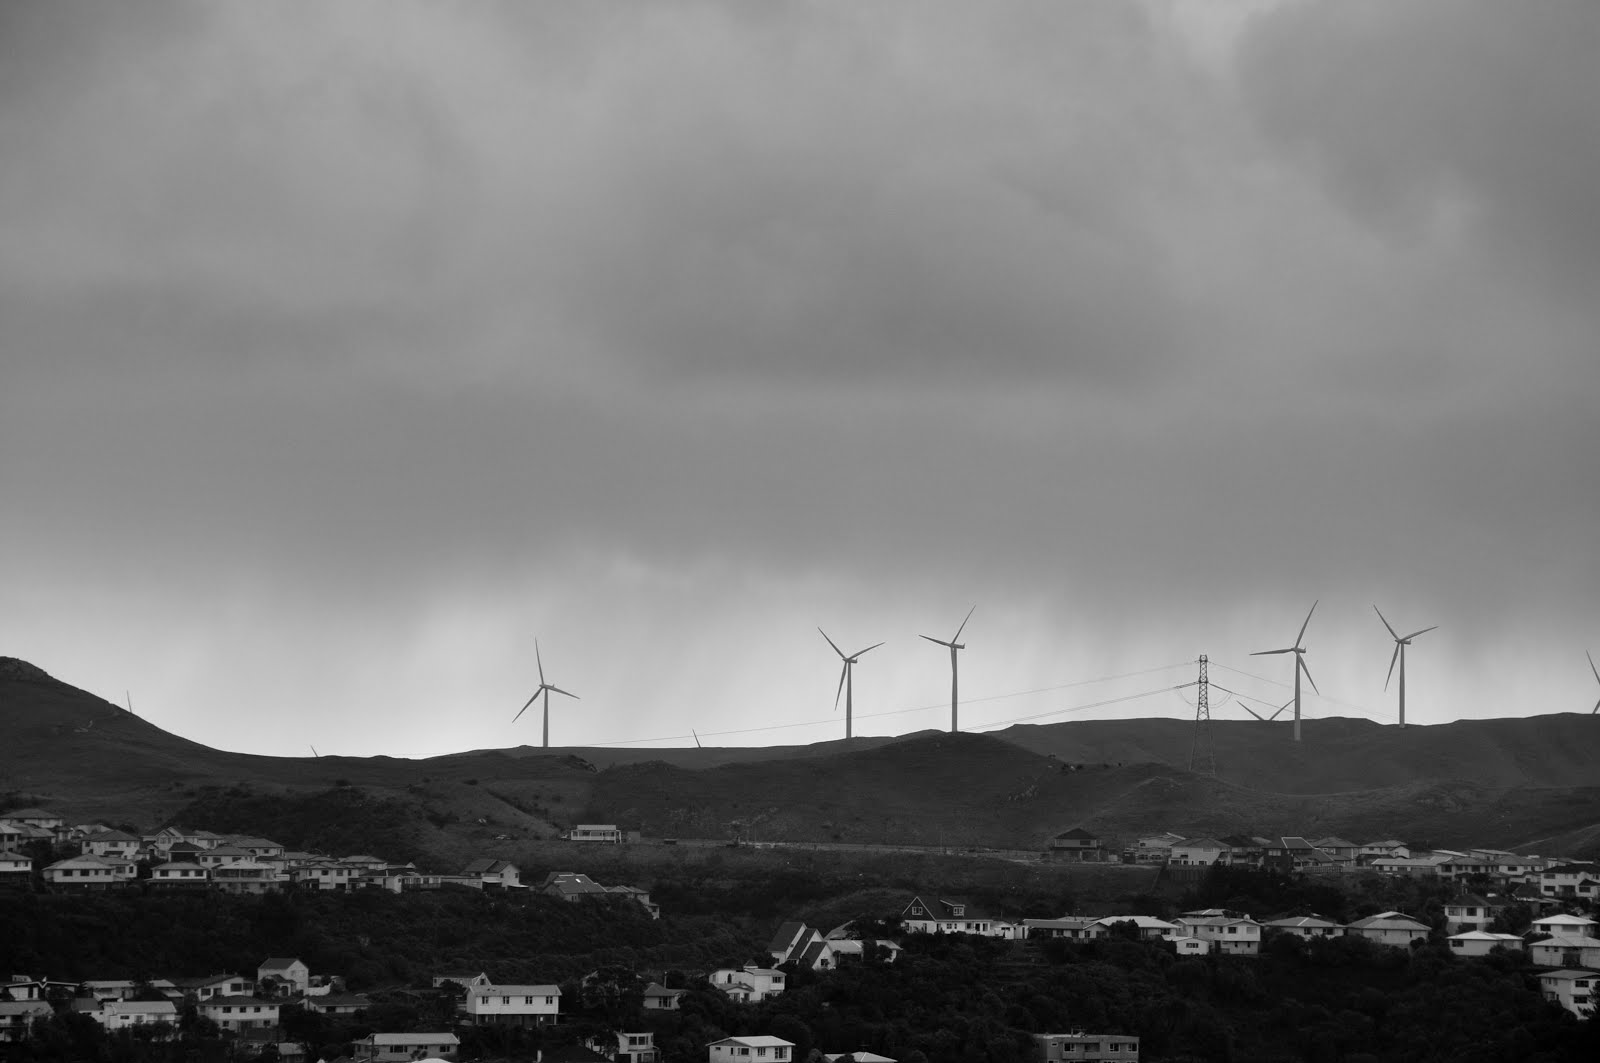 Looking west to spinning wind turbines on a cold grey afternoon